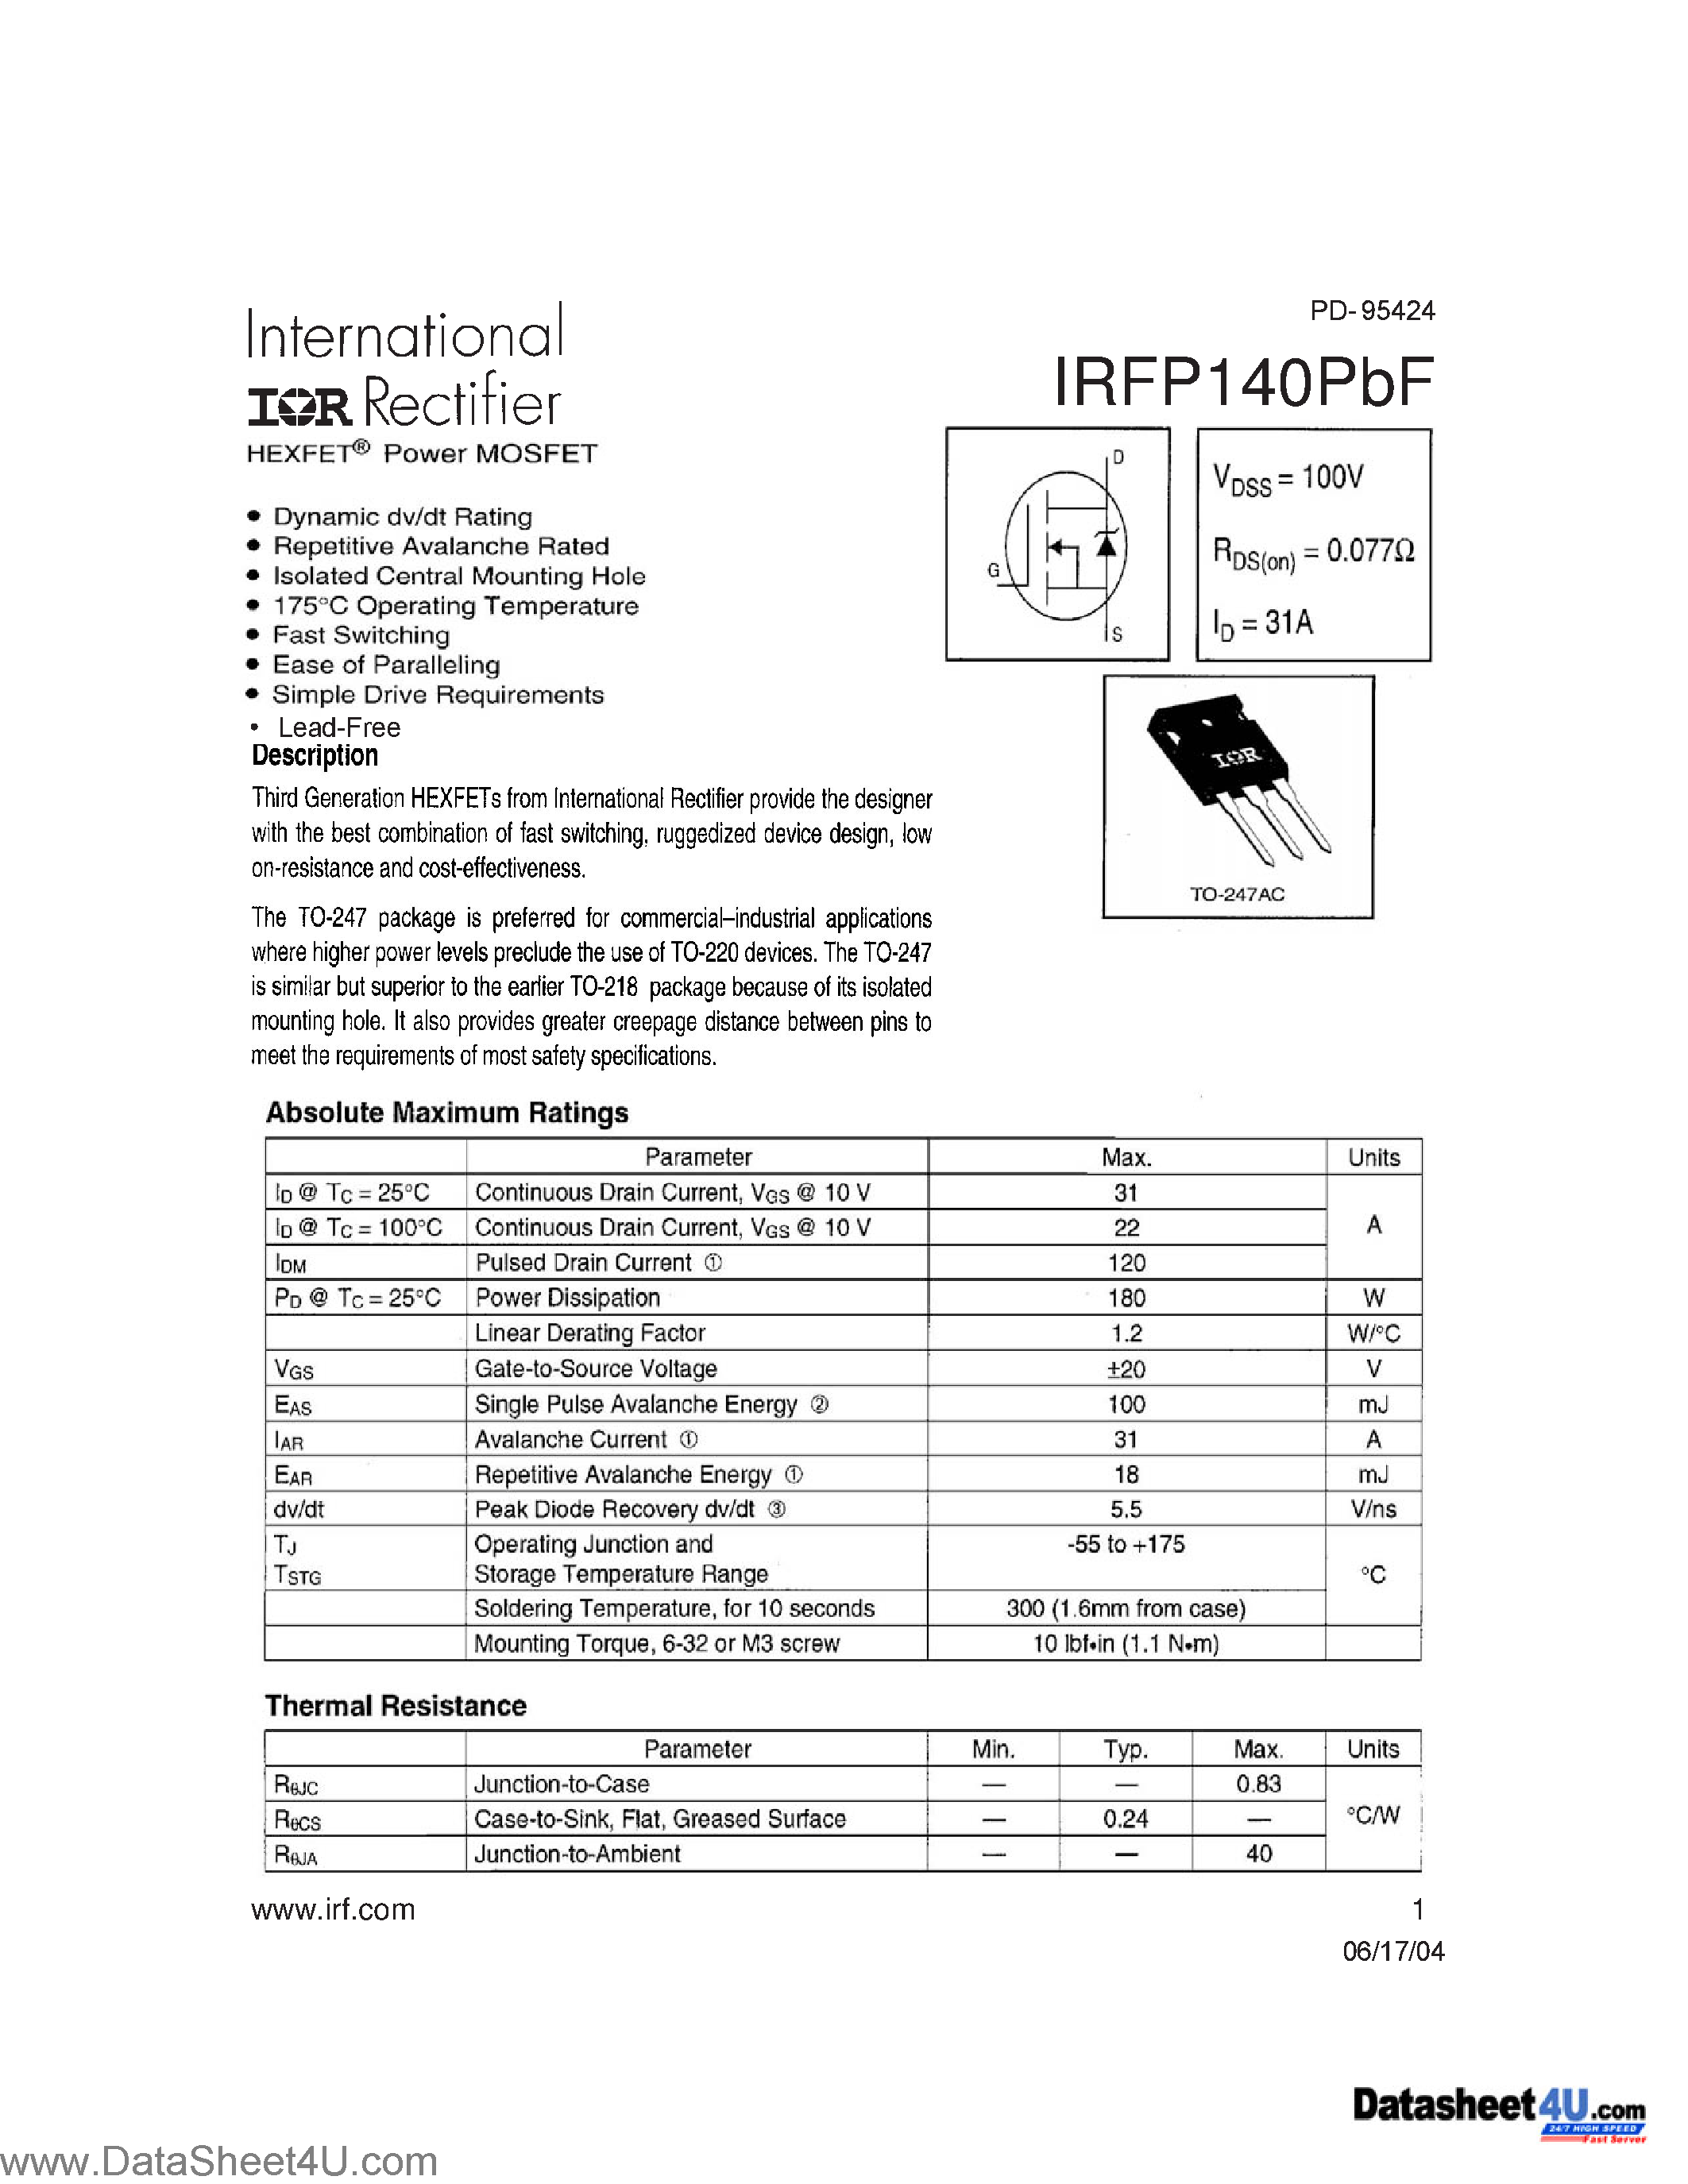 Даташит IRFP140PBF - Preferred for commercail-industrial applications страница 1